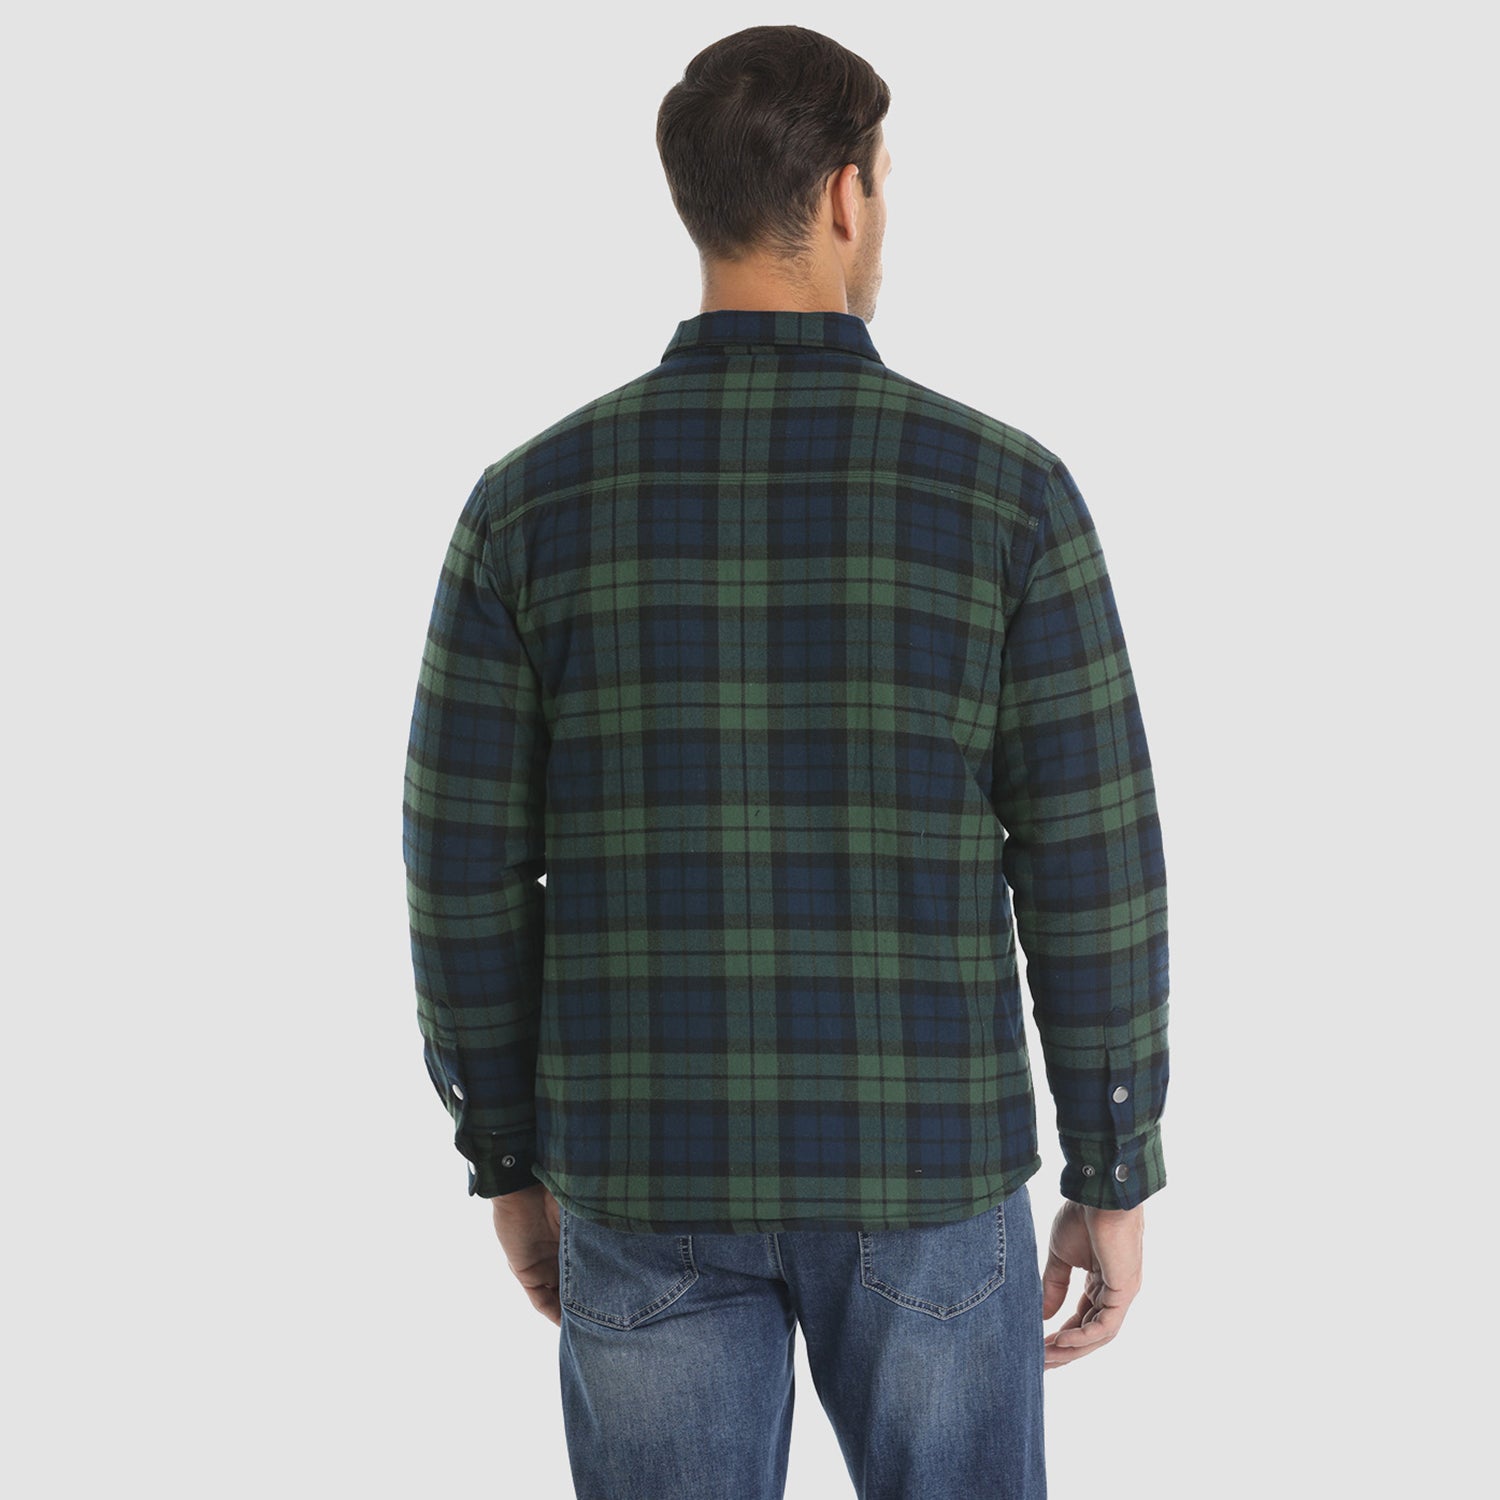 YYDGH Men's Flannel Plaid Shirt Jacket Winter Warm Long Sleeve Quilted  Lined Plaid Drawstring Coats Soft Button Down Thick Shirts with Hood Green  L 